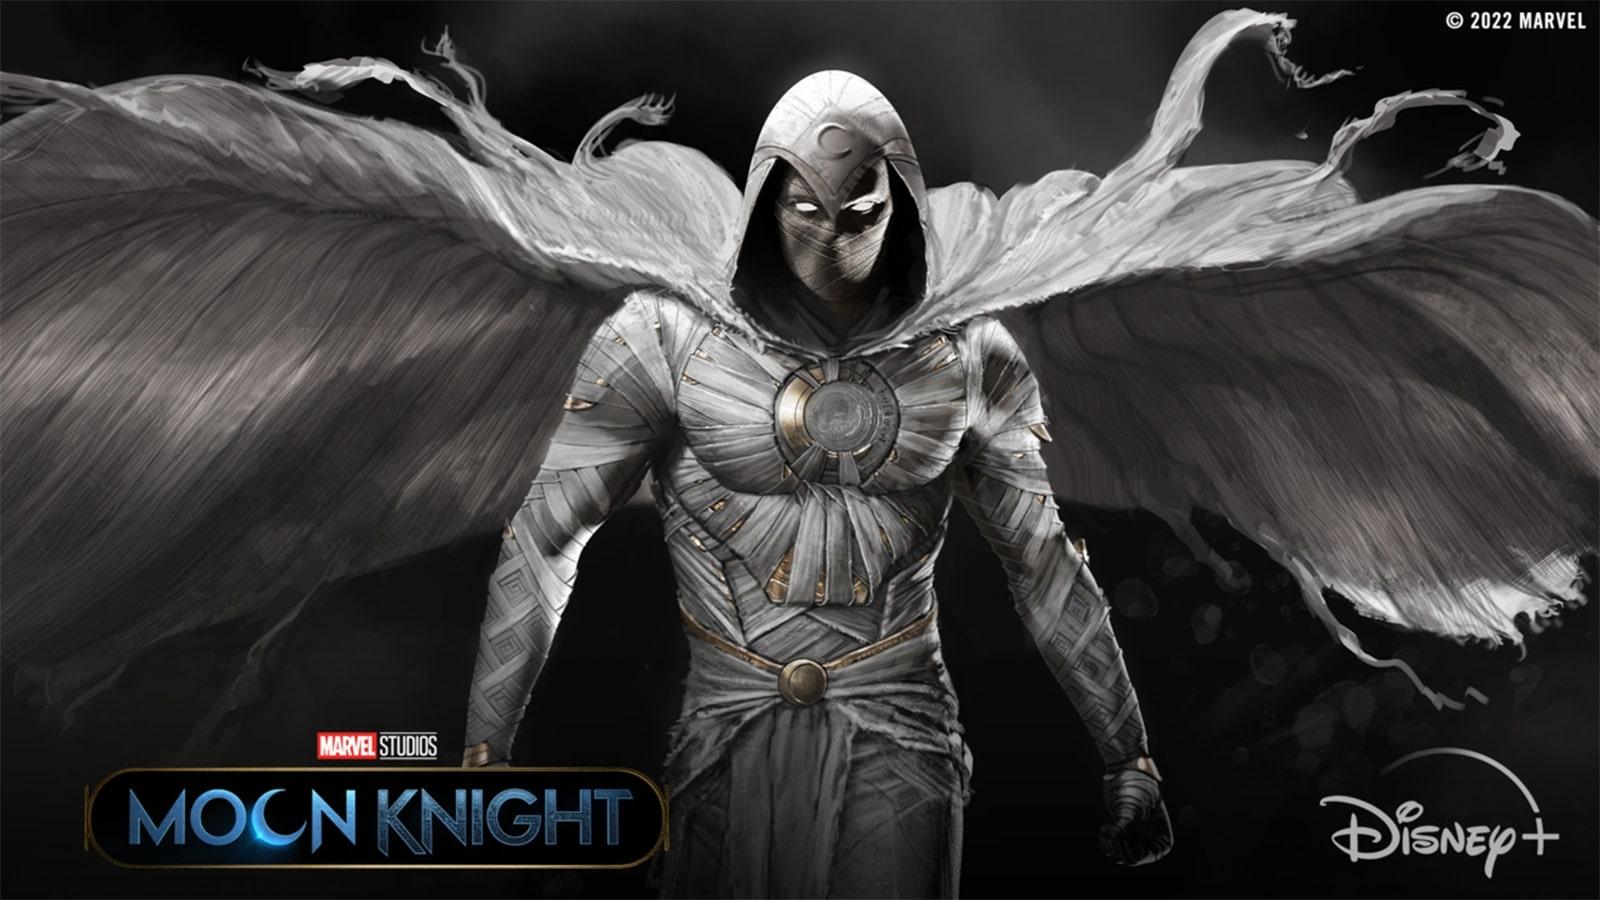 Will There Be a 'Moon Knight' Season 2 on Disney+?